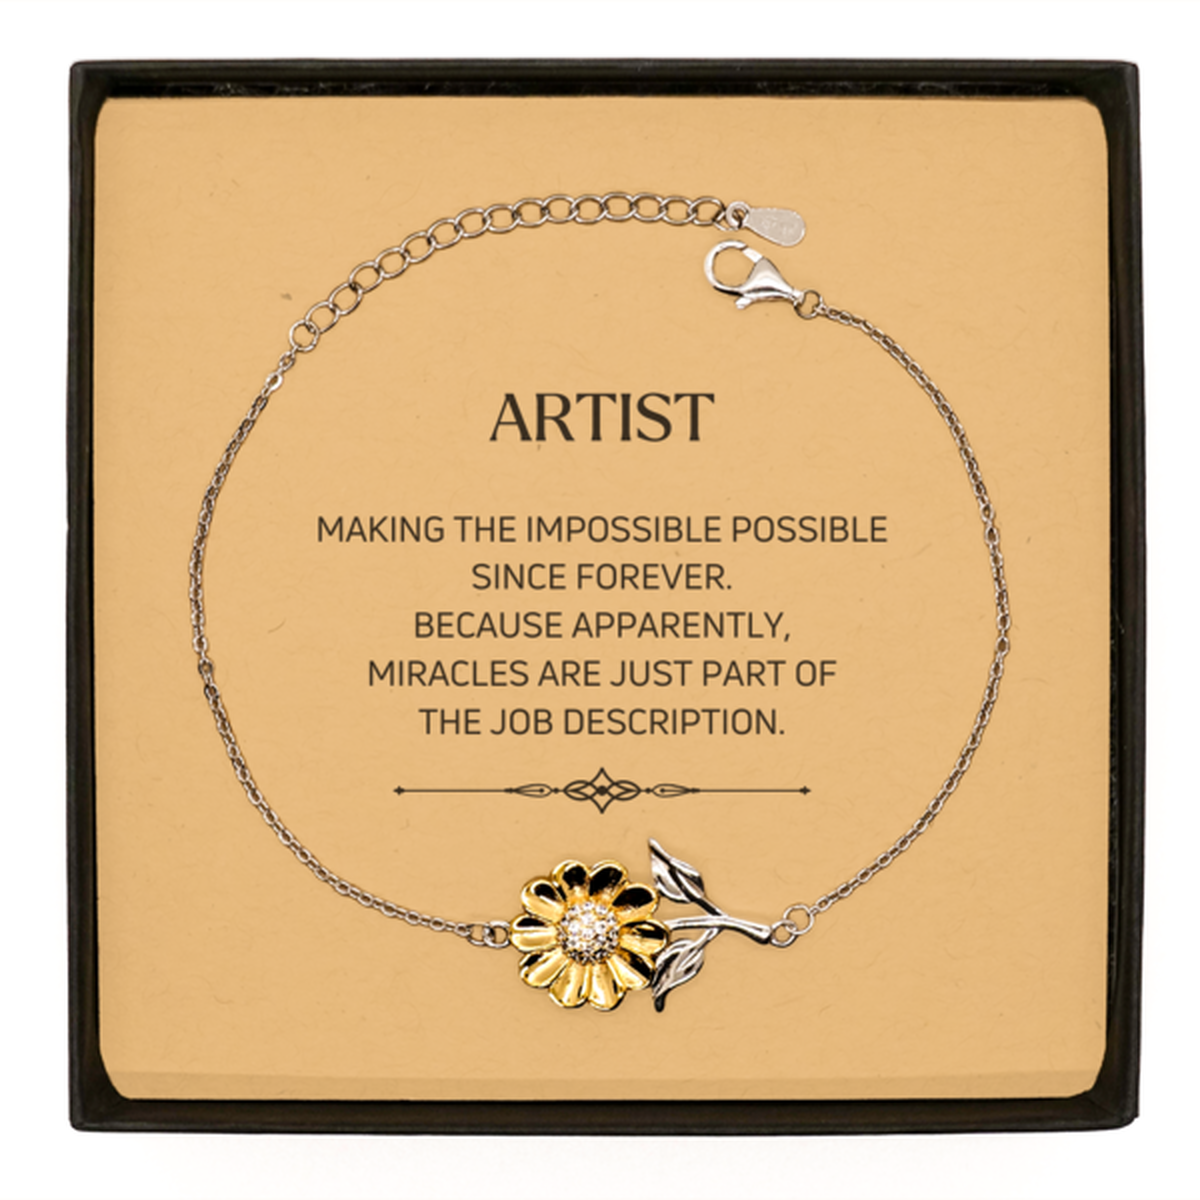 Funny Artist Gifts, Miracles are just part of the job description, Inspirational Birthday Sunflower Bracelet For Artist, Men, Women, Coworkers, Friends, Boss